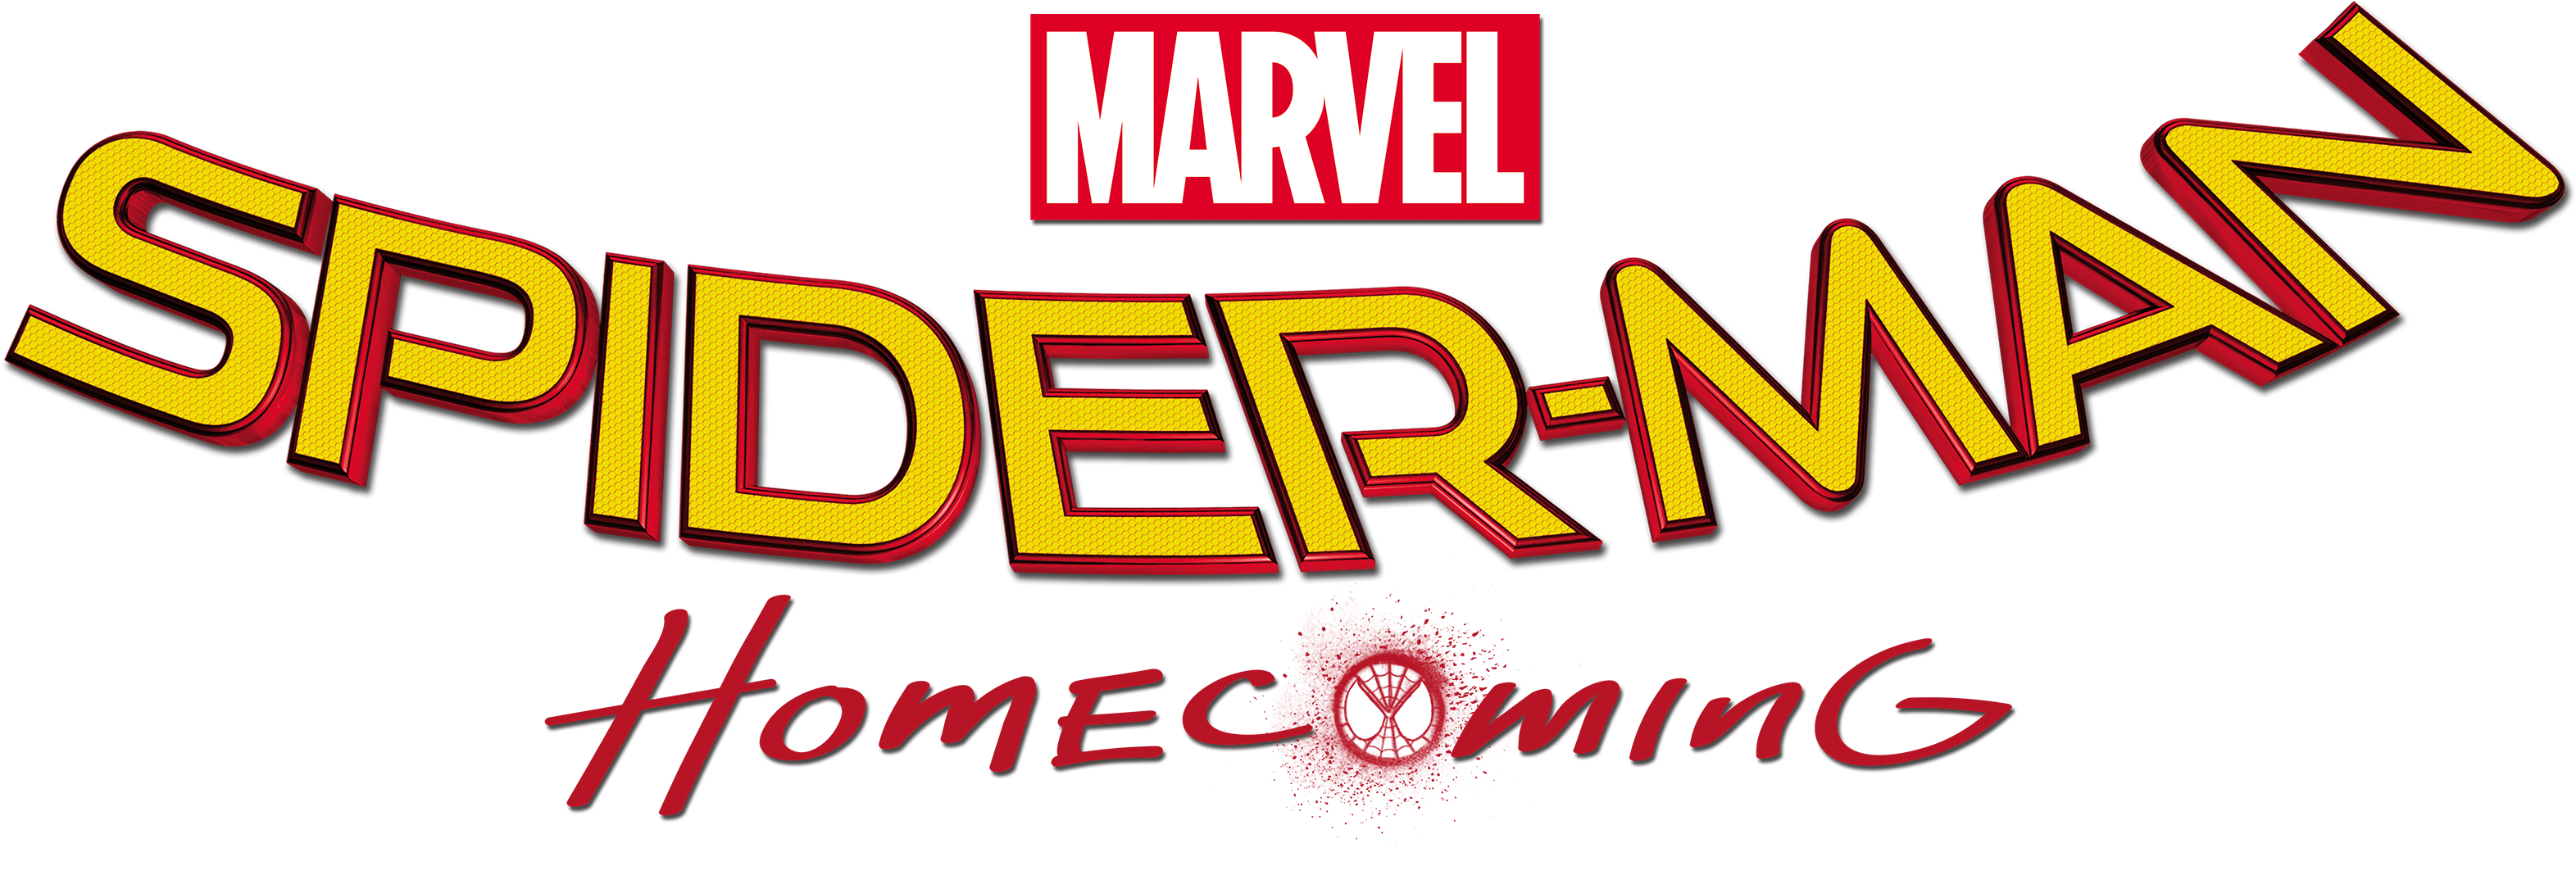 Marvel Spider Man Homecoming - Spiderman Homecoming Movie Logo (640x217), Png Download